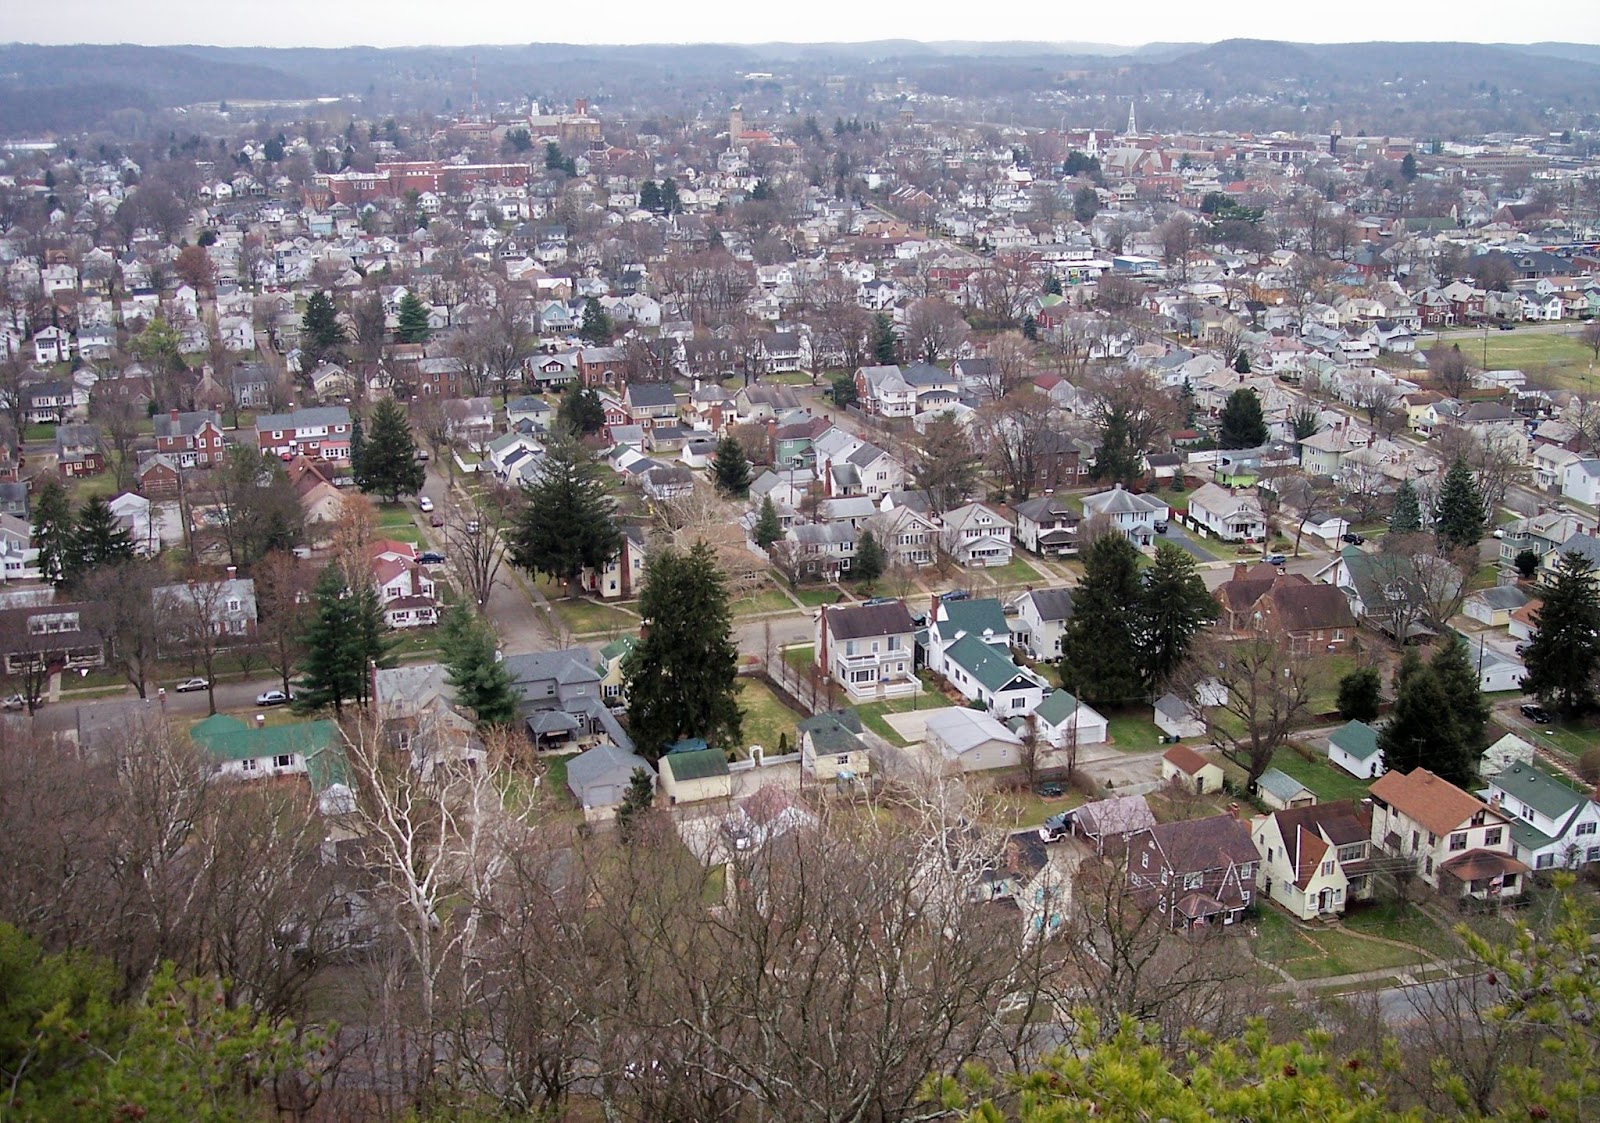 In Rising Park, climb Mount Pleasant to get a good look at Lancaster.